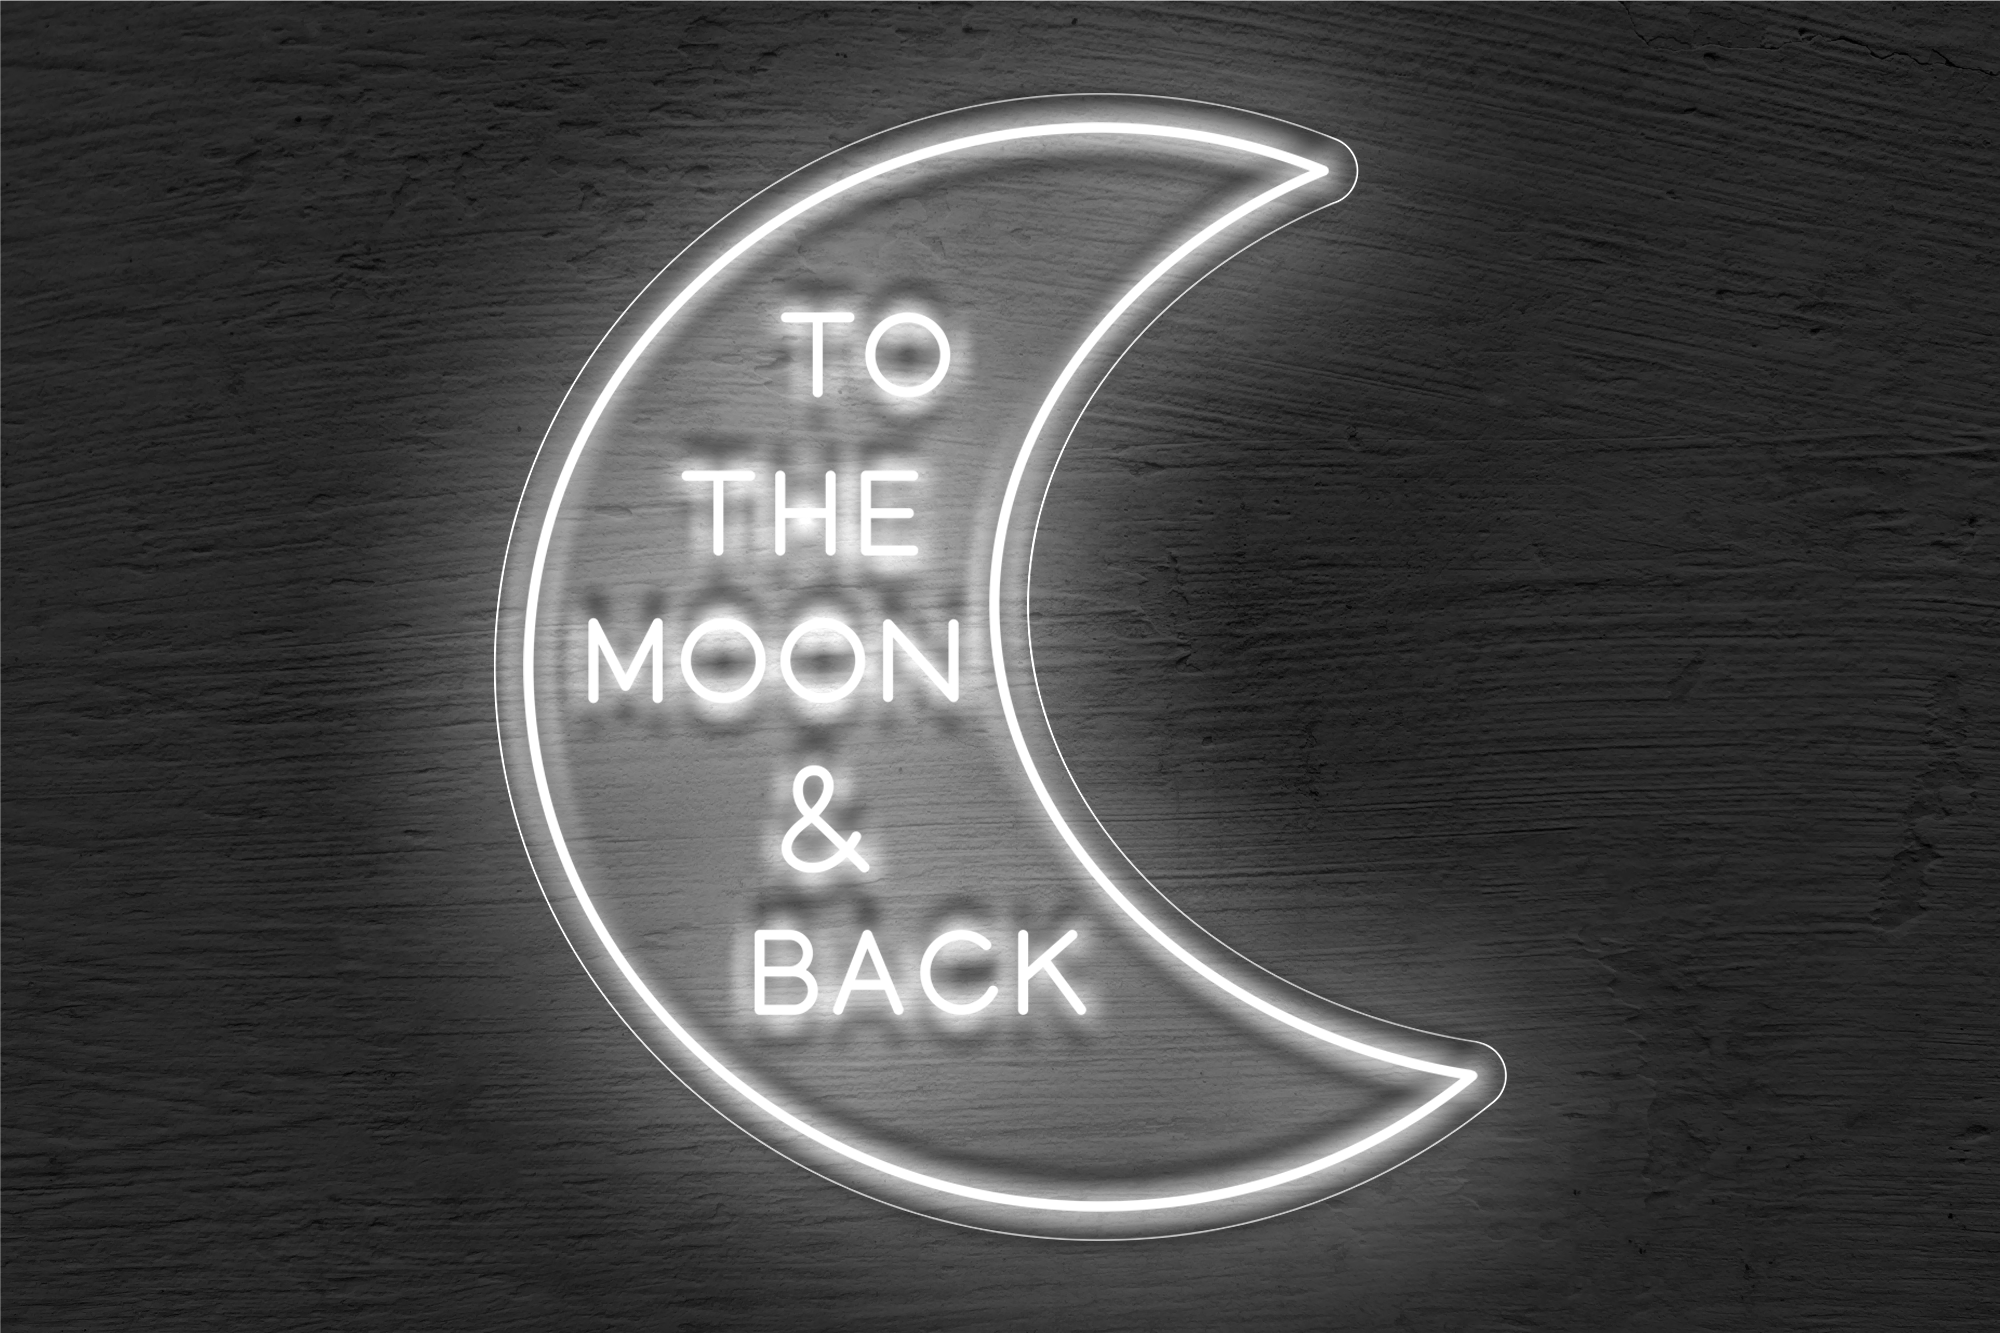 "To the moon & back" LED Neon Sign